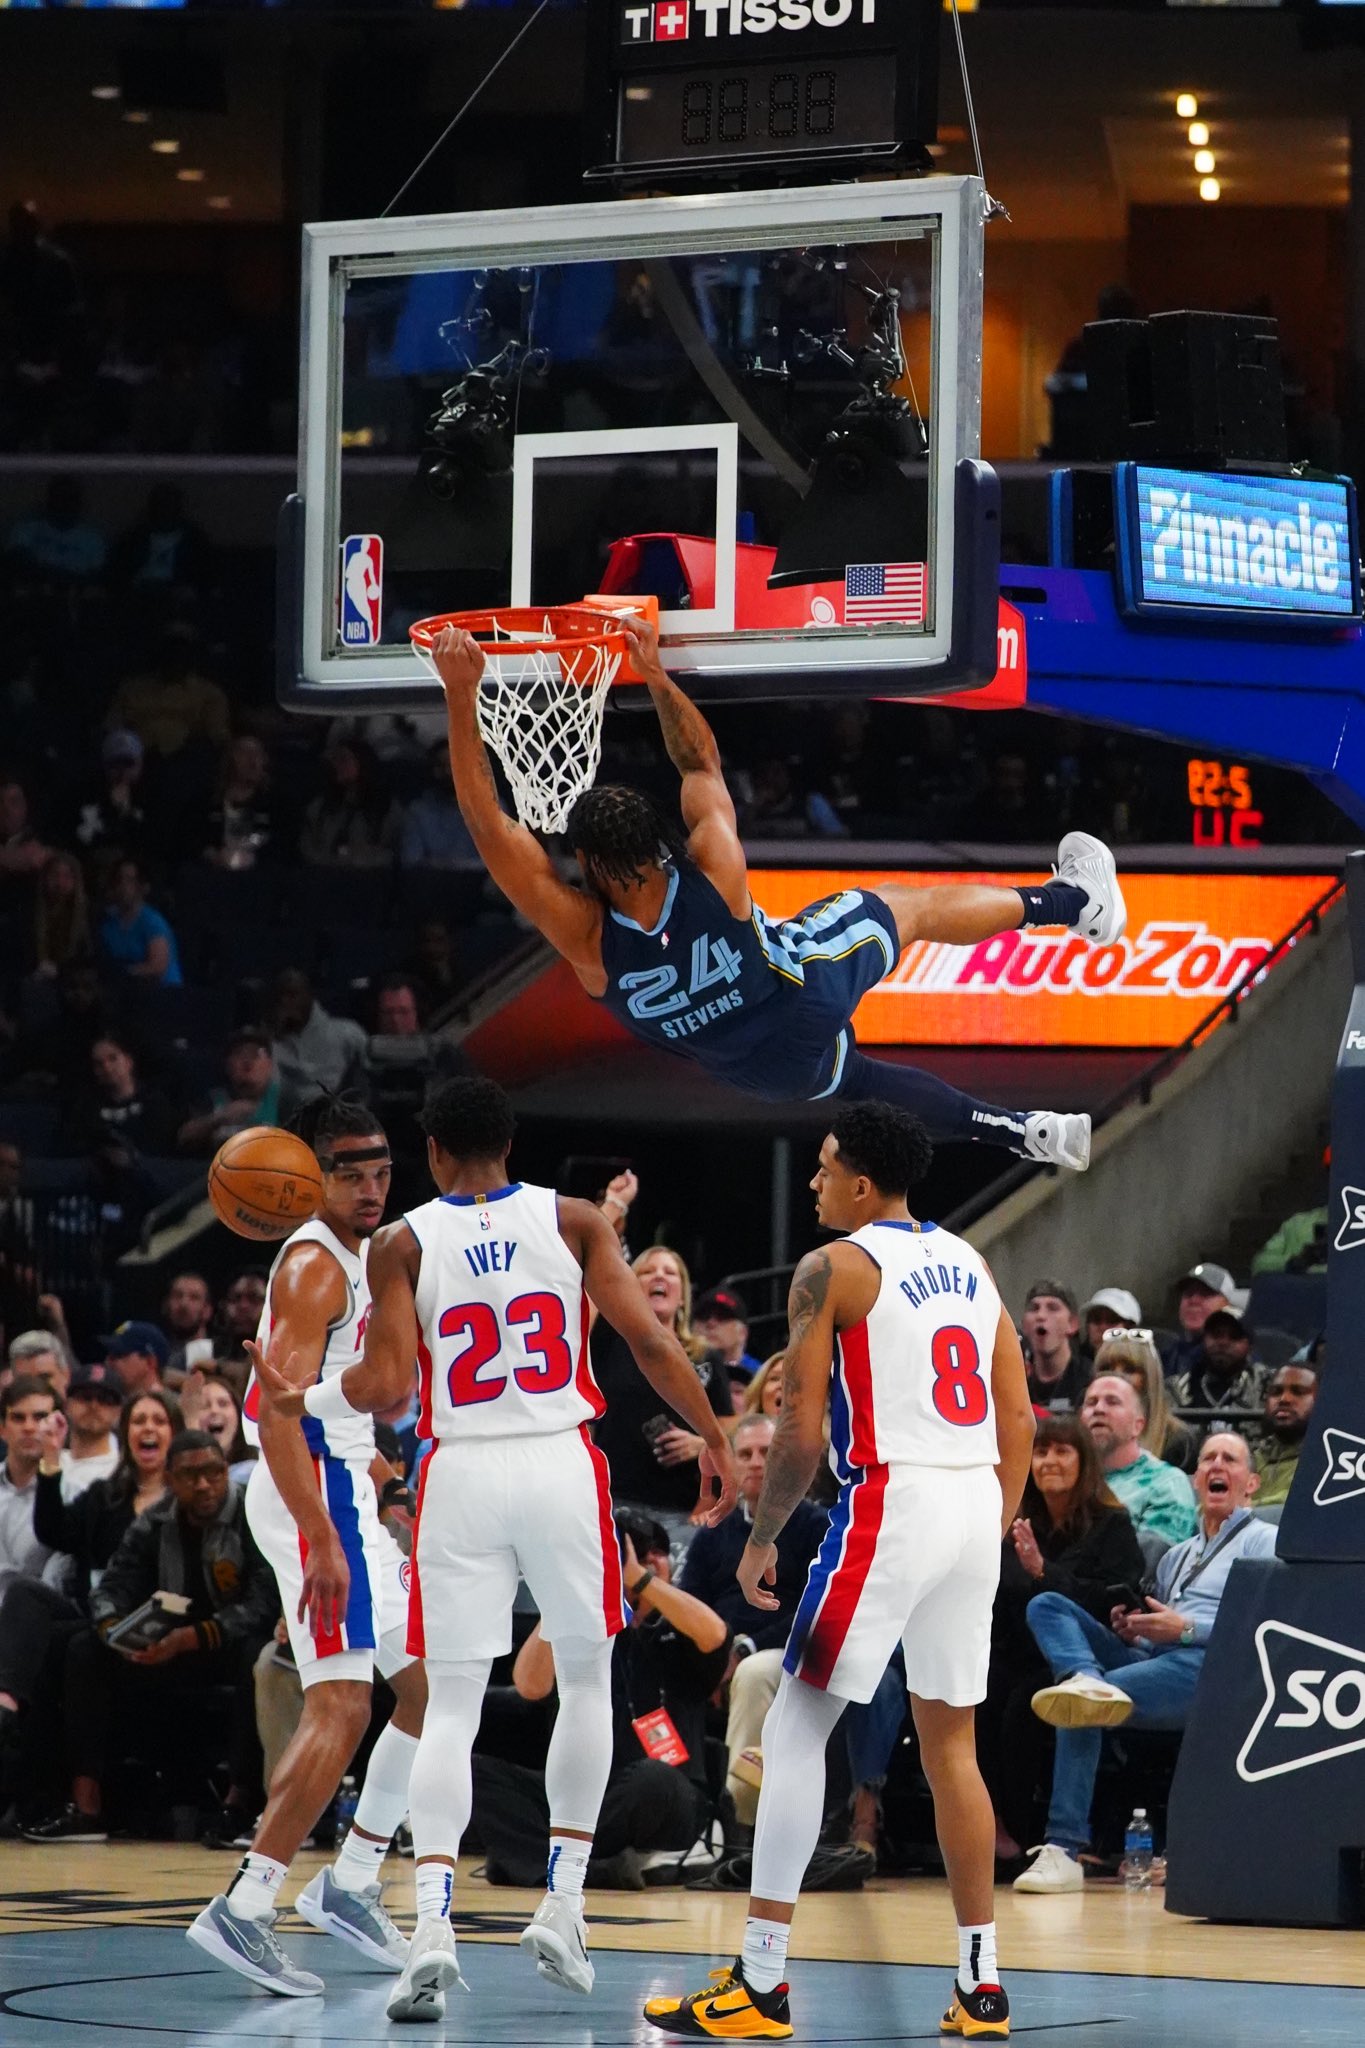 Featured image for “Insider Insights: Seven Players Score in Double Figures, Grizzlies Sweep Pistons”